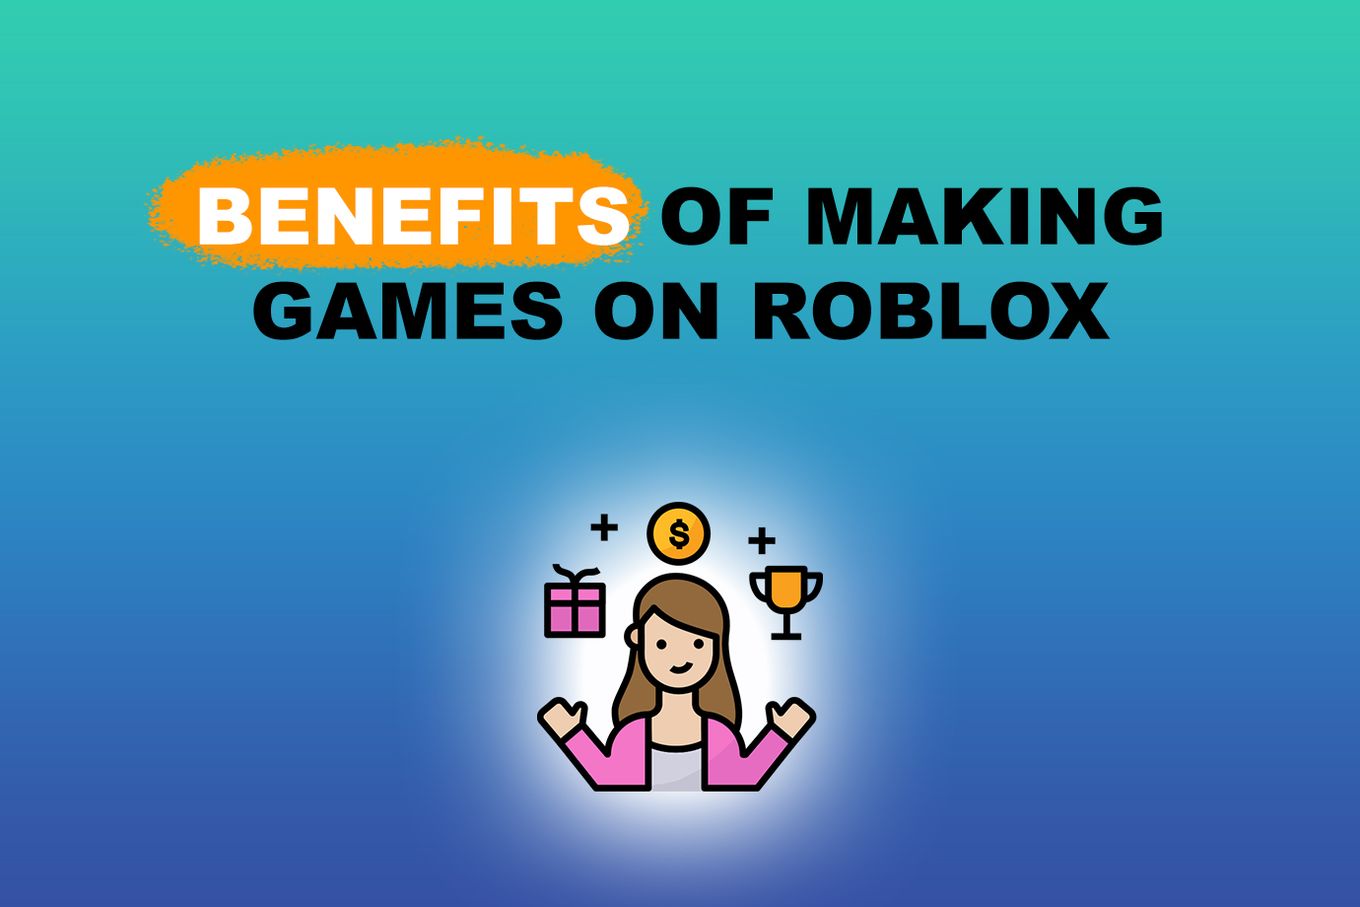 Benefits of making games on Roblox